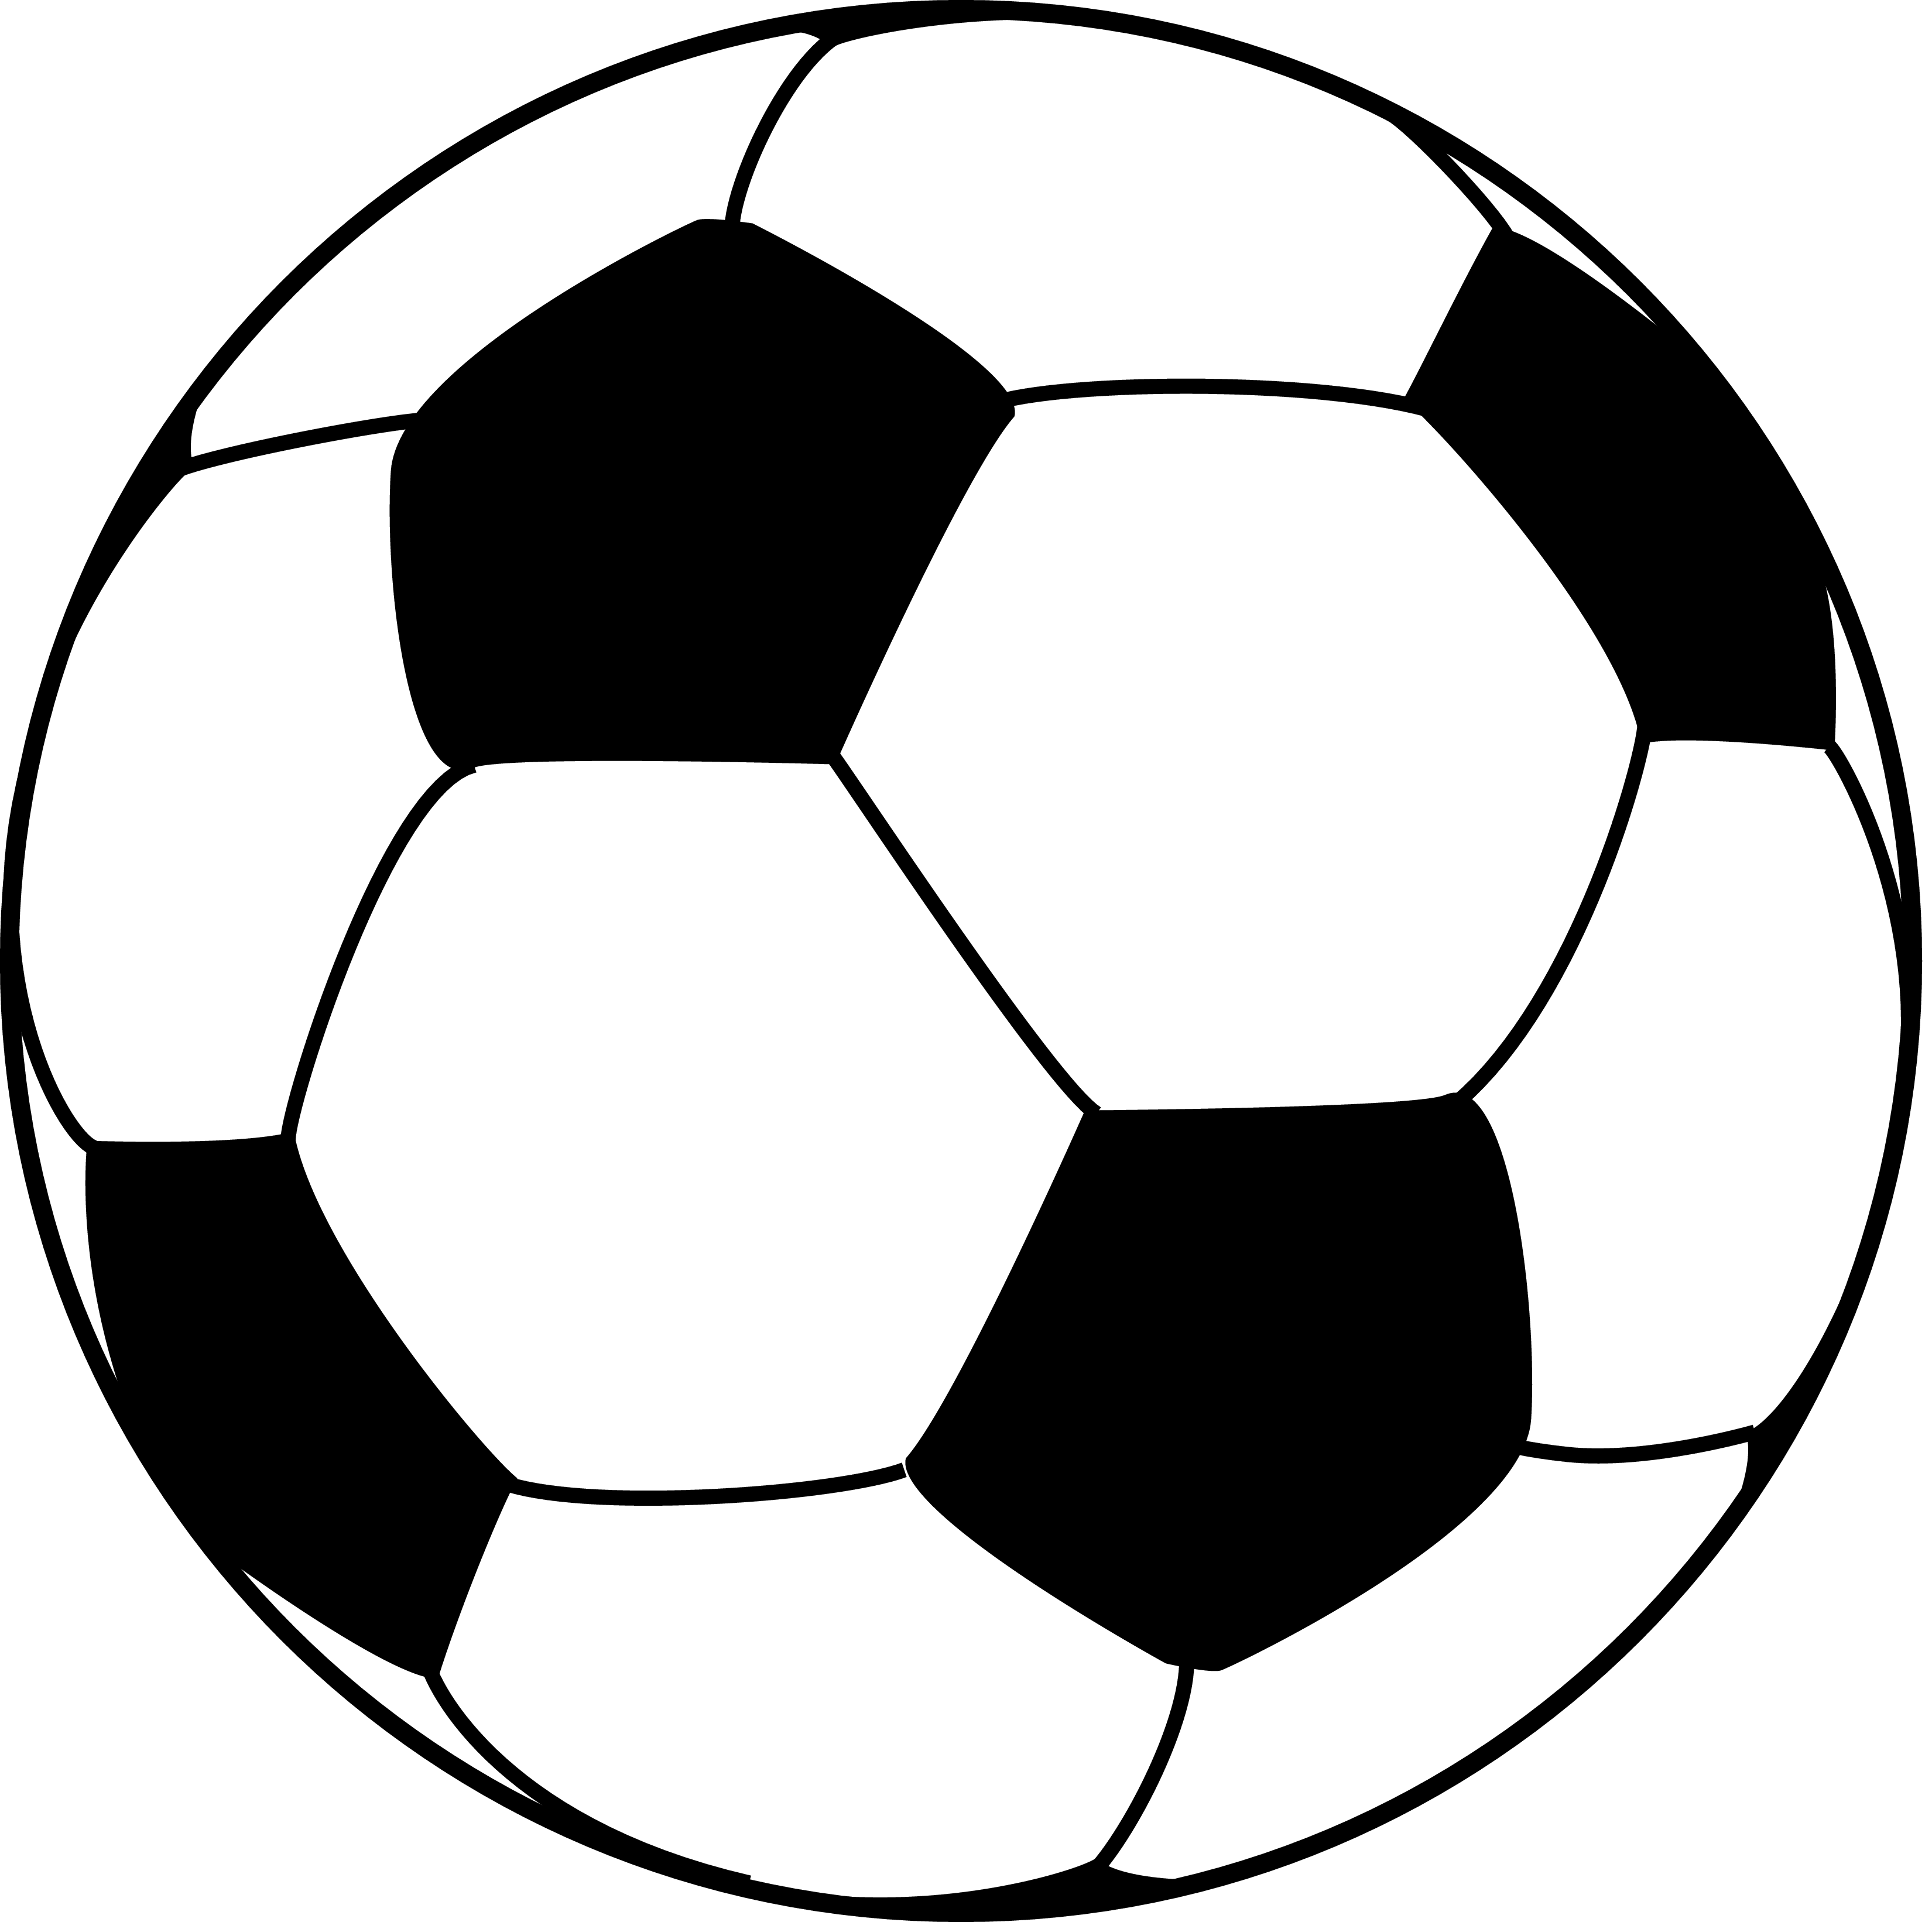 Clipart shoes soccer ball. Drawing easy at getdrawings